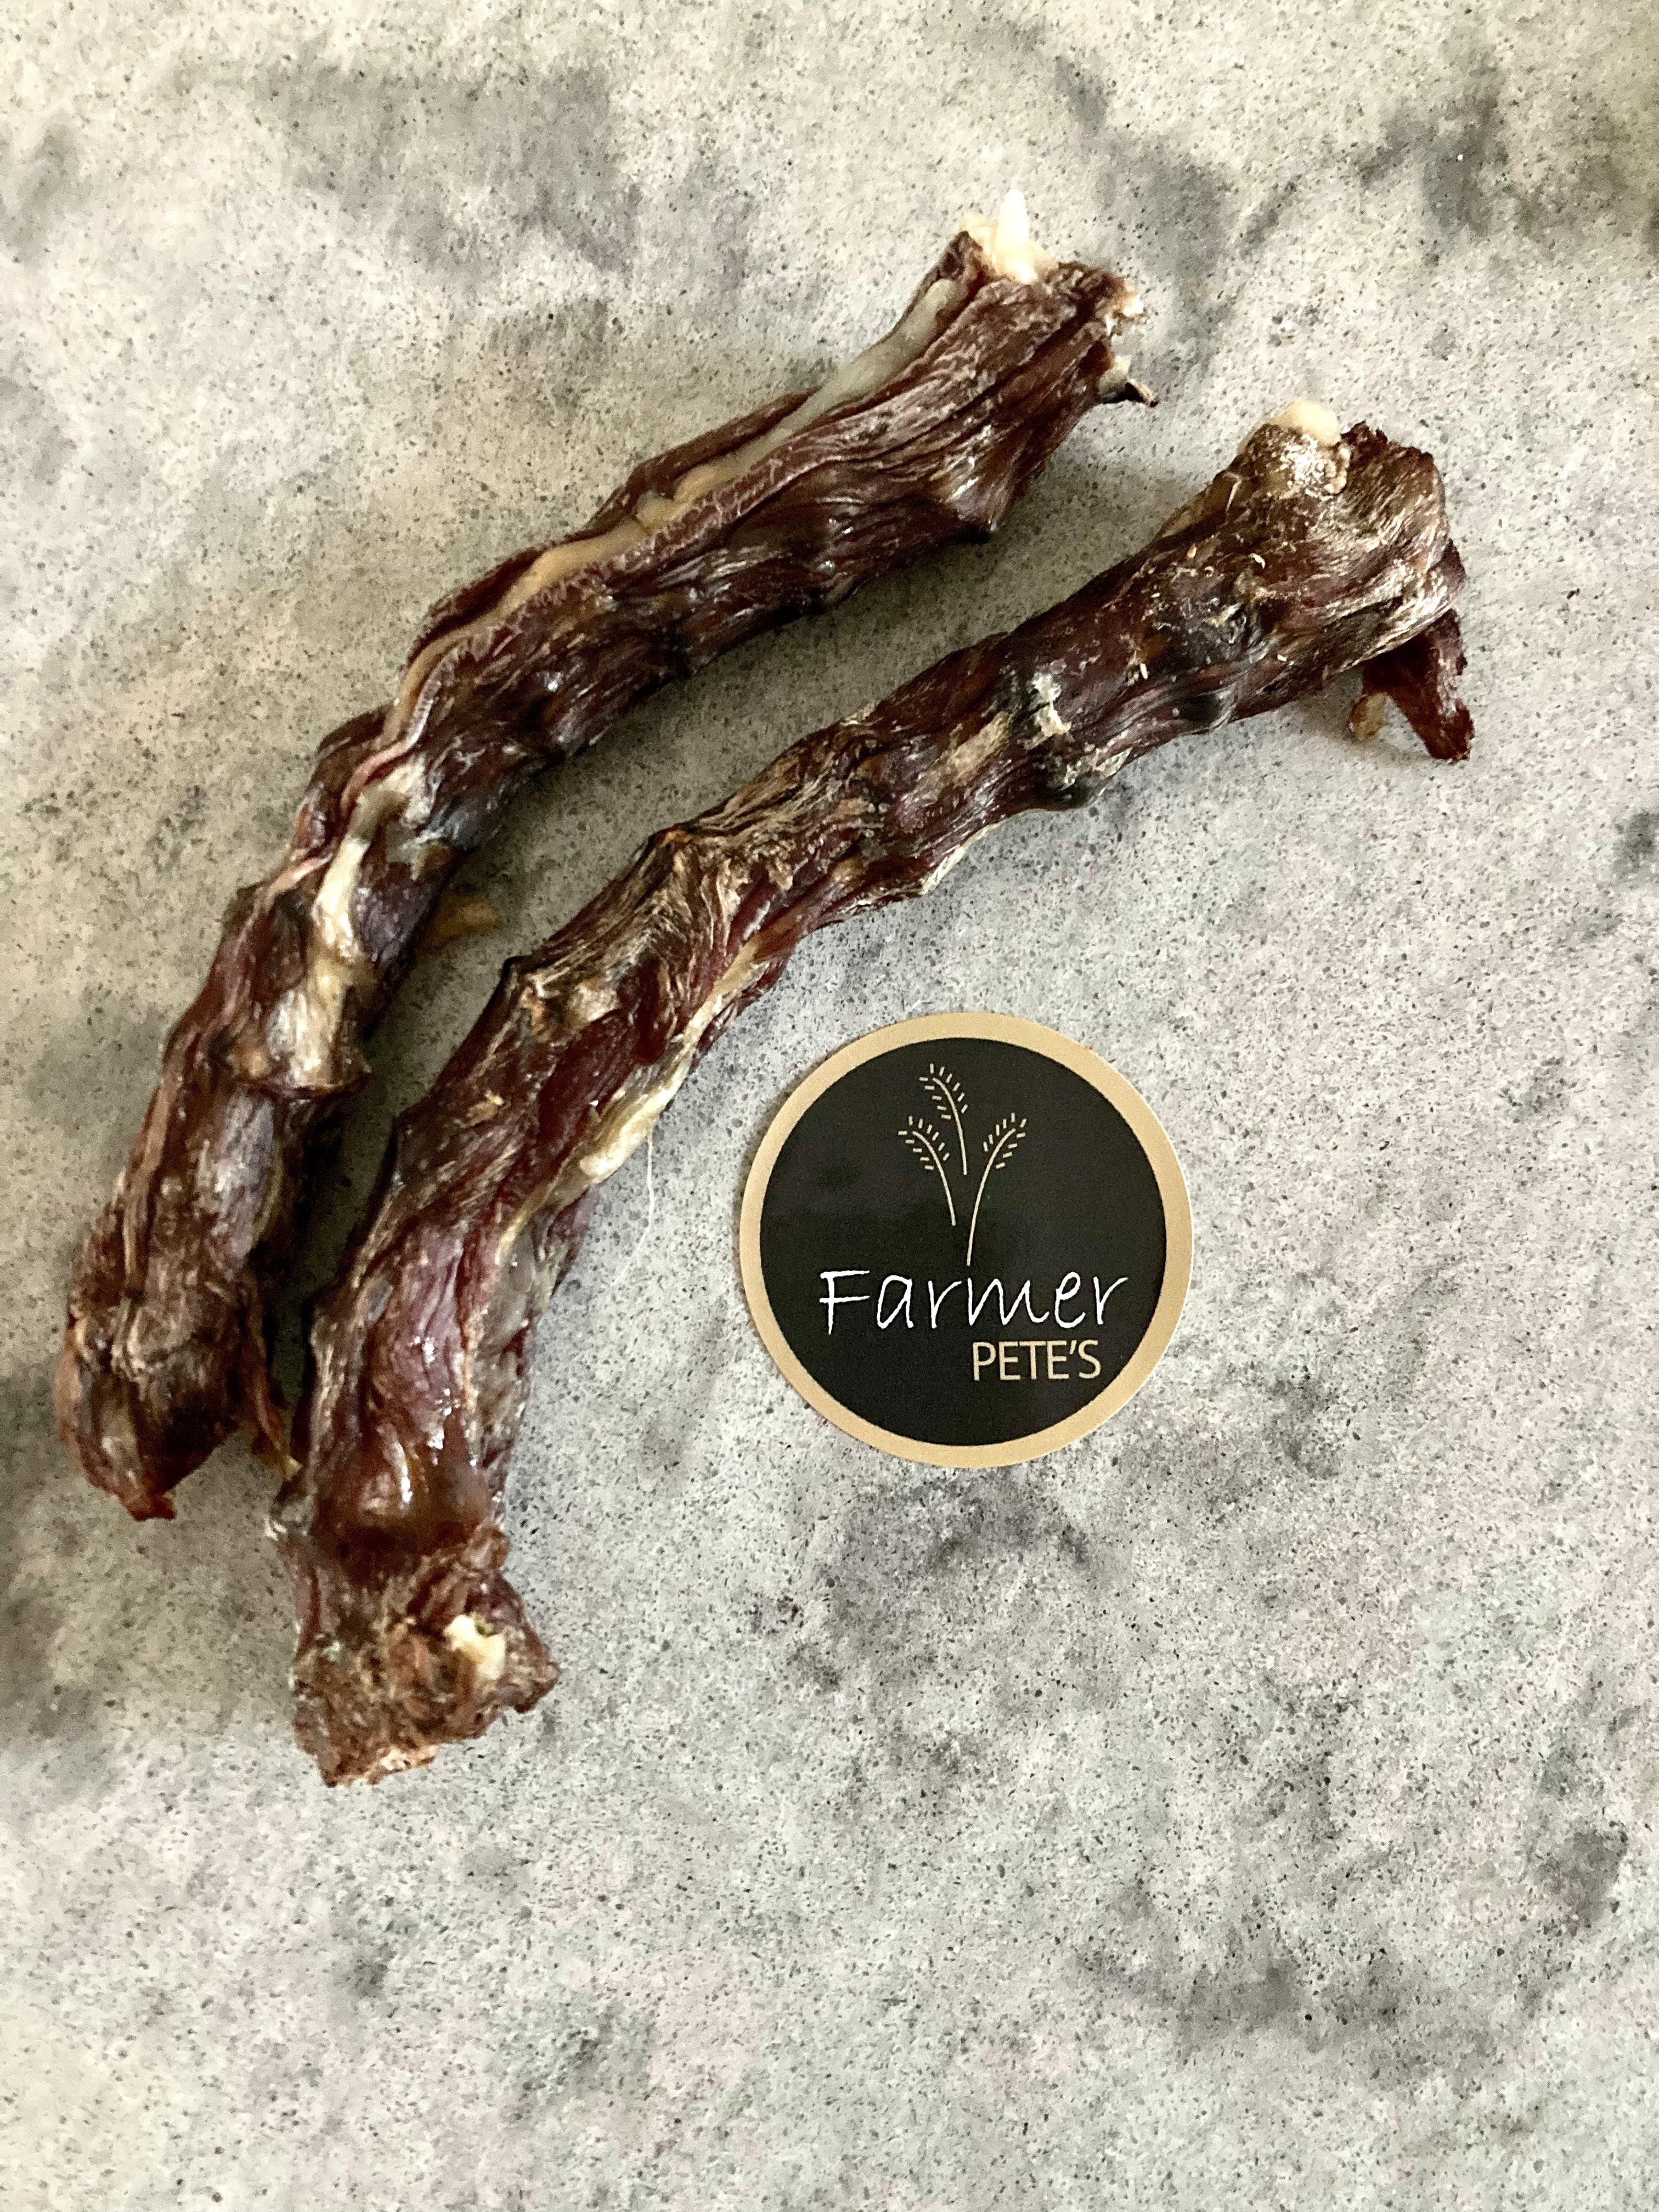 Dehydrated duck neck dog chews. All natural by Farmer Pete's.